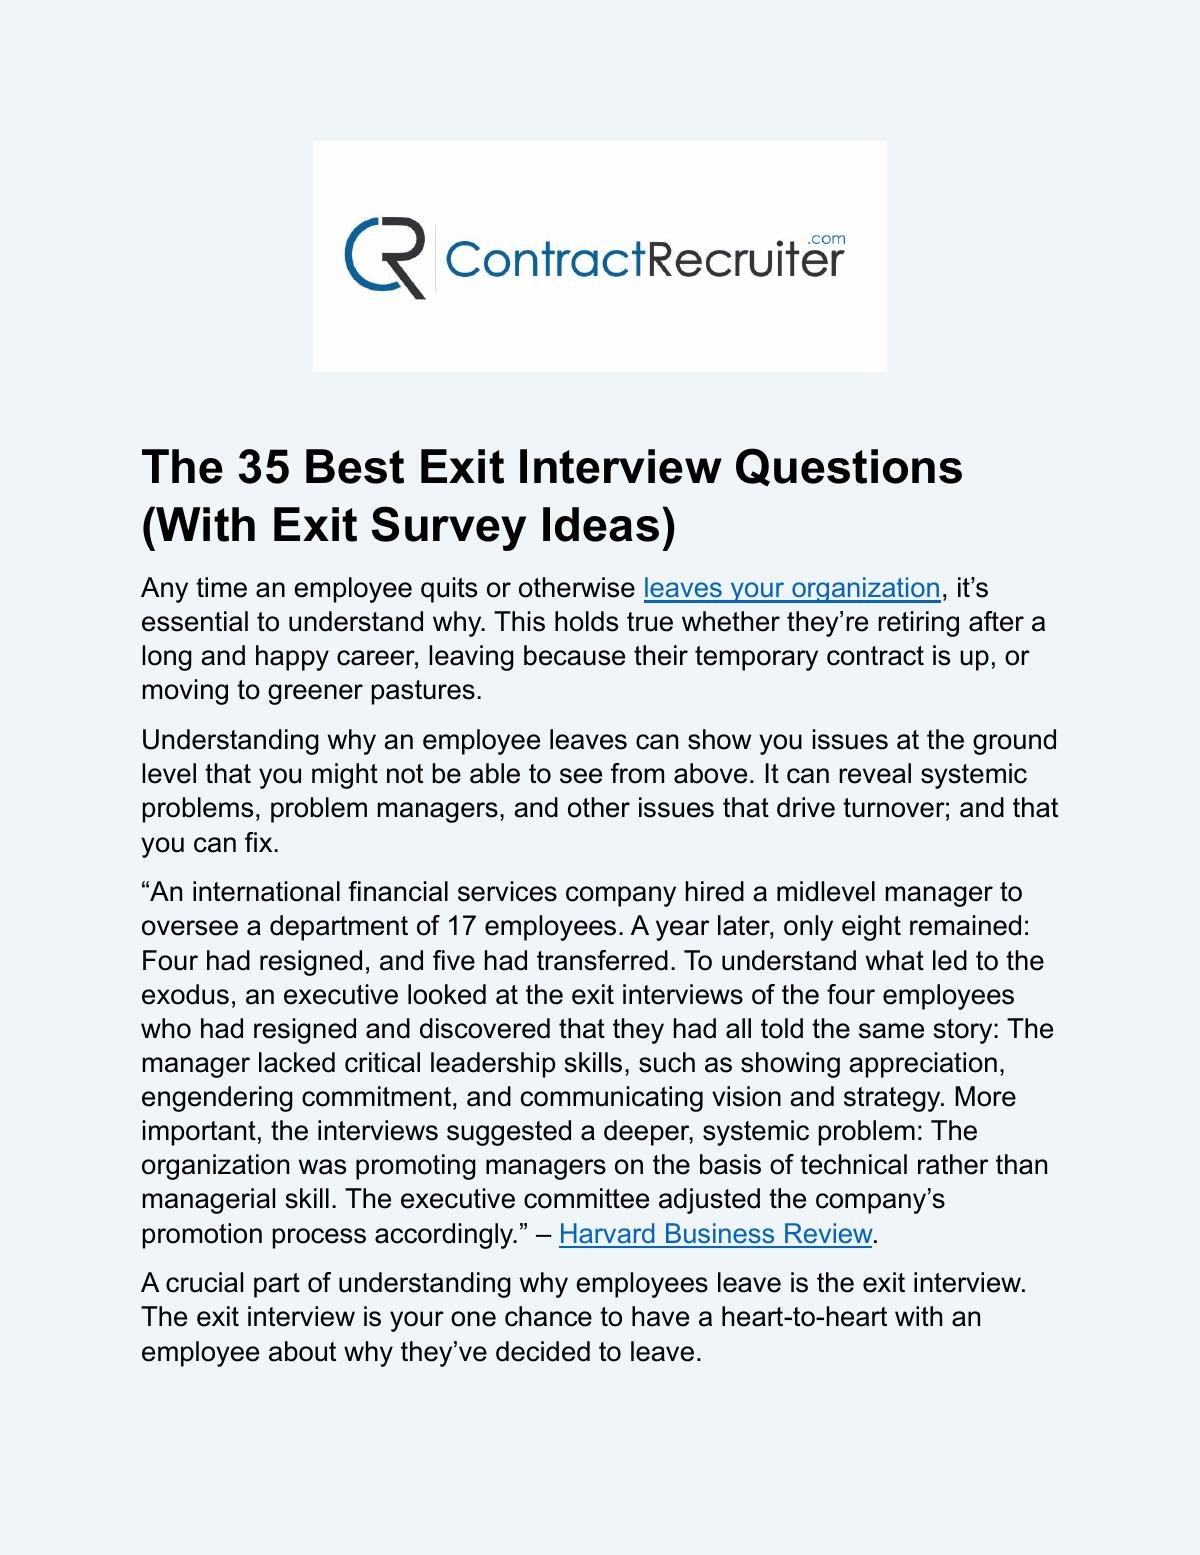 35 Best Exit Interview Questions (with Survey Ideas)